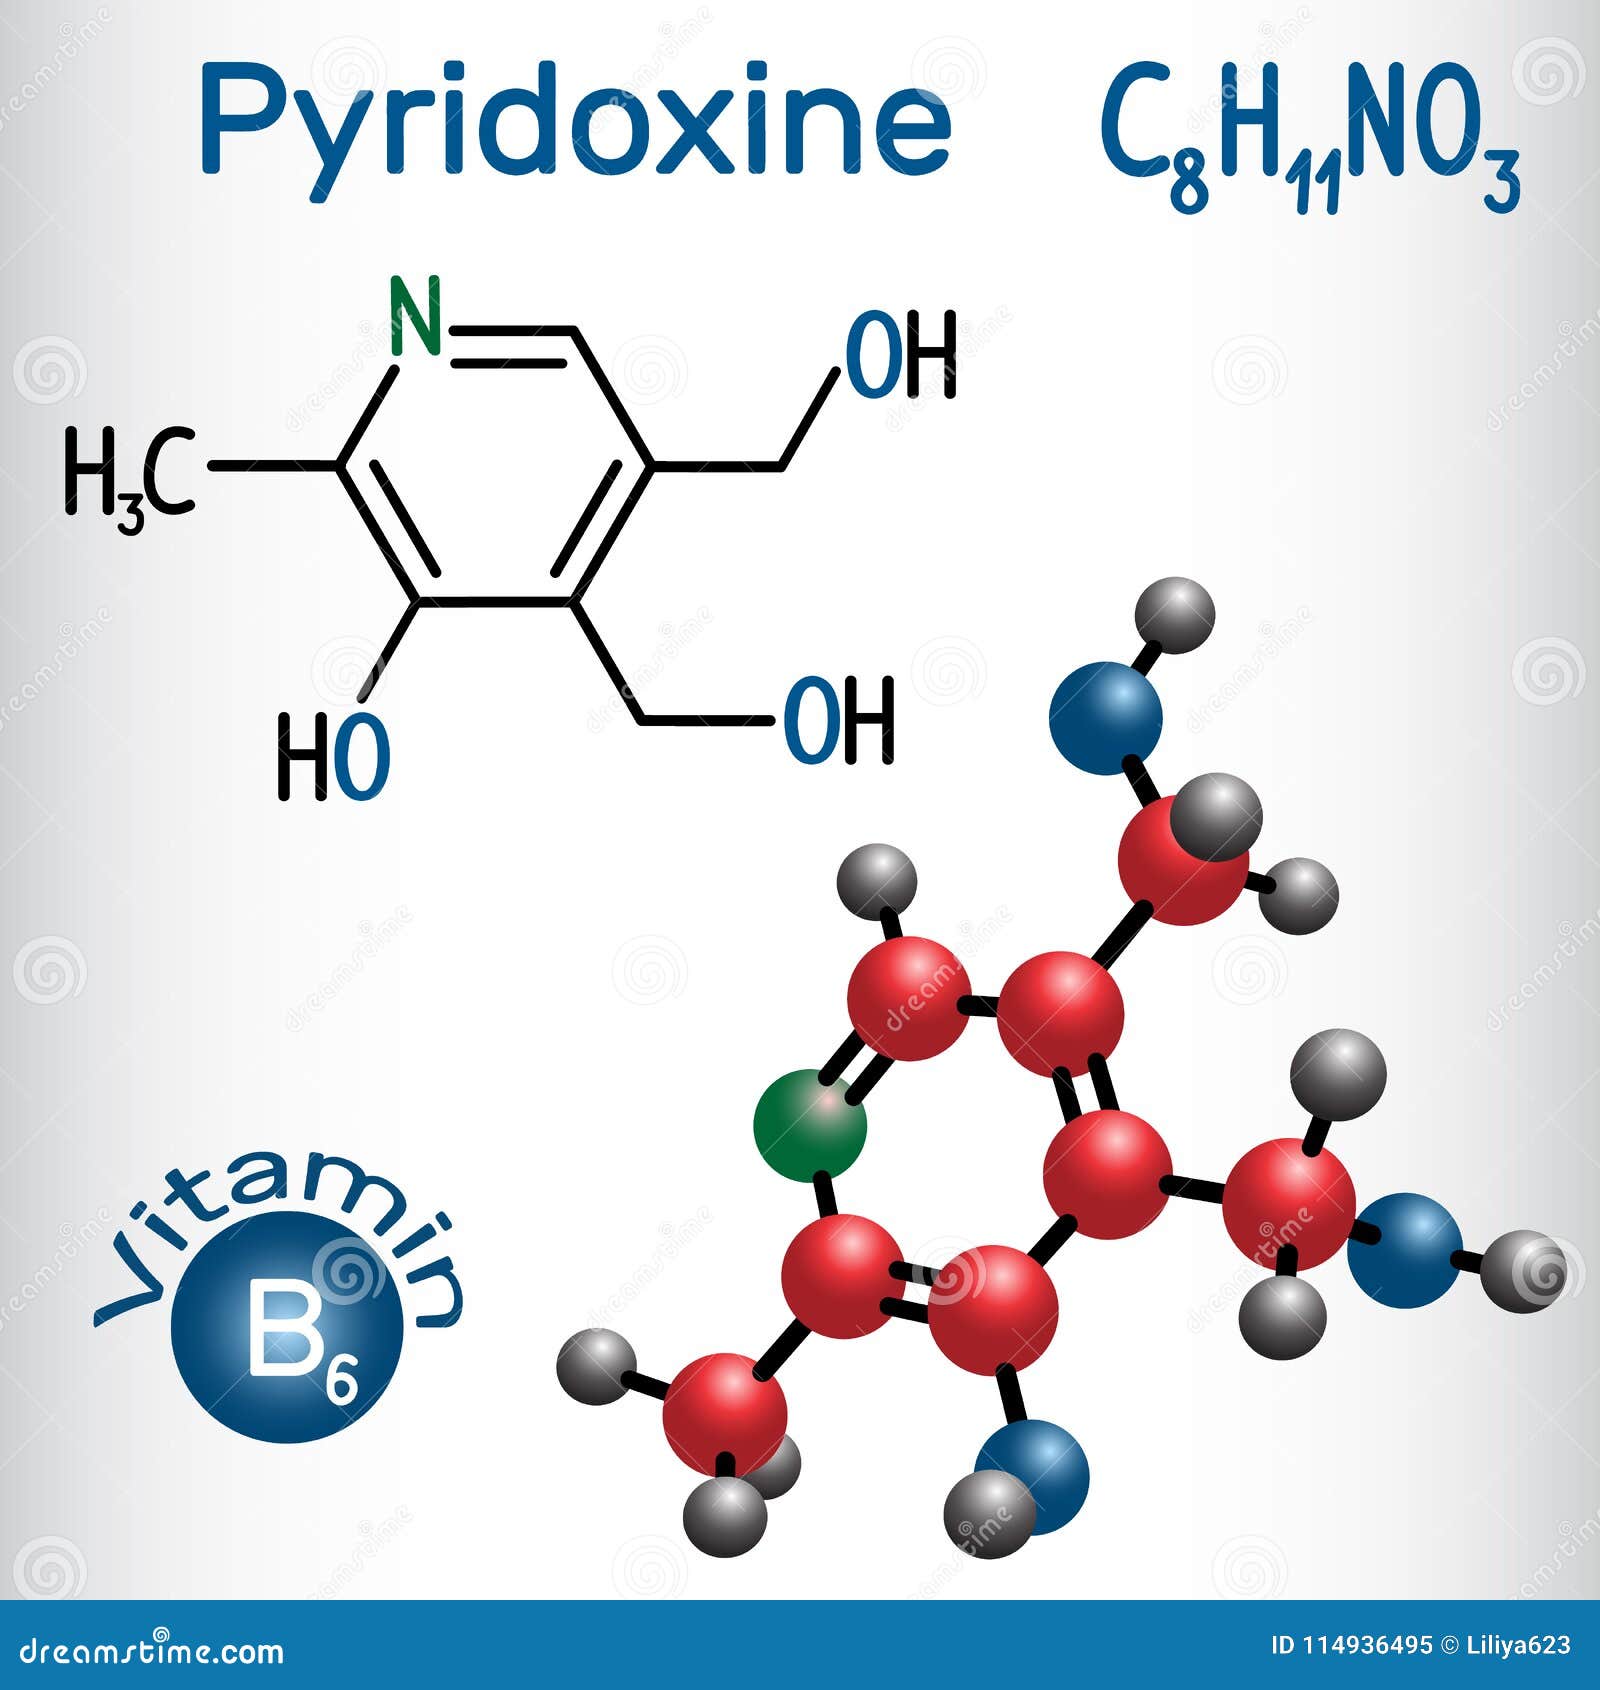 List 92+ Images what is the chemical formula for pyridoxine? Updated